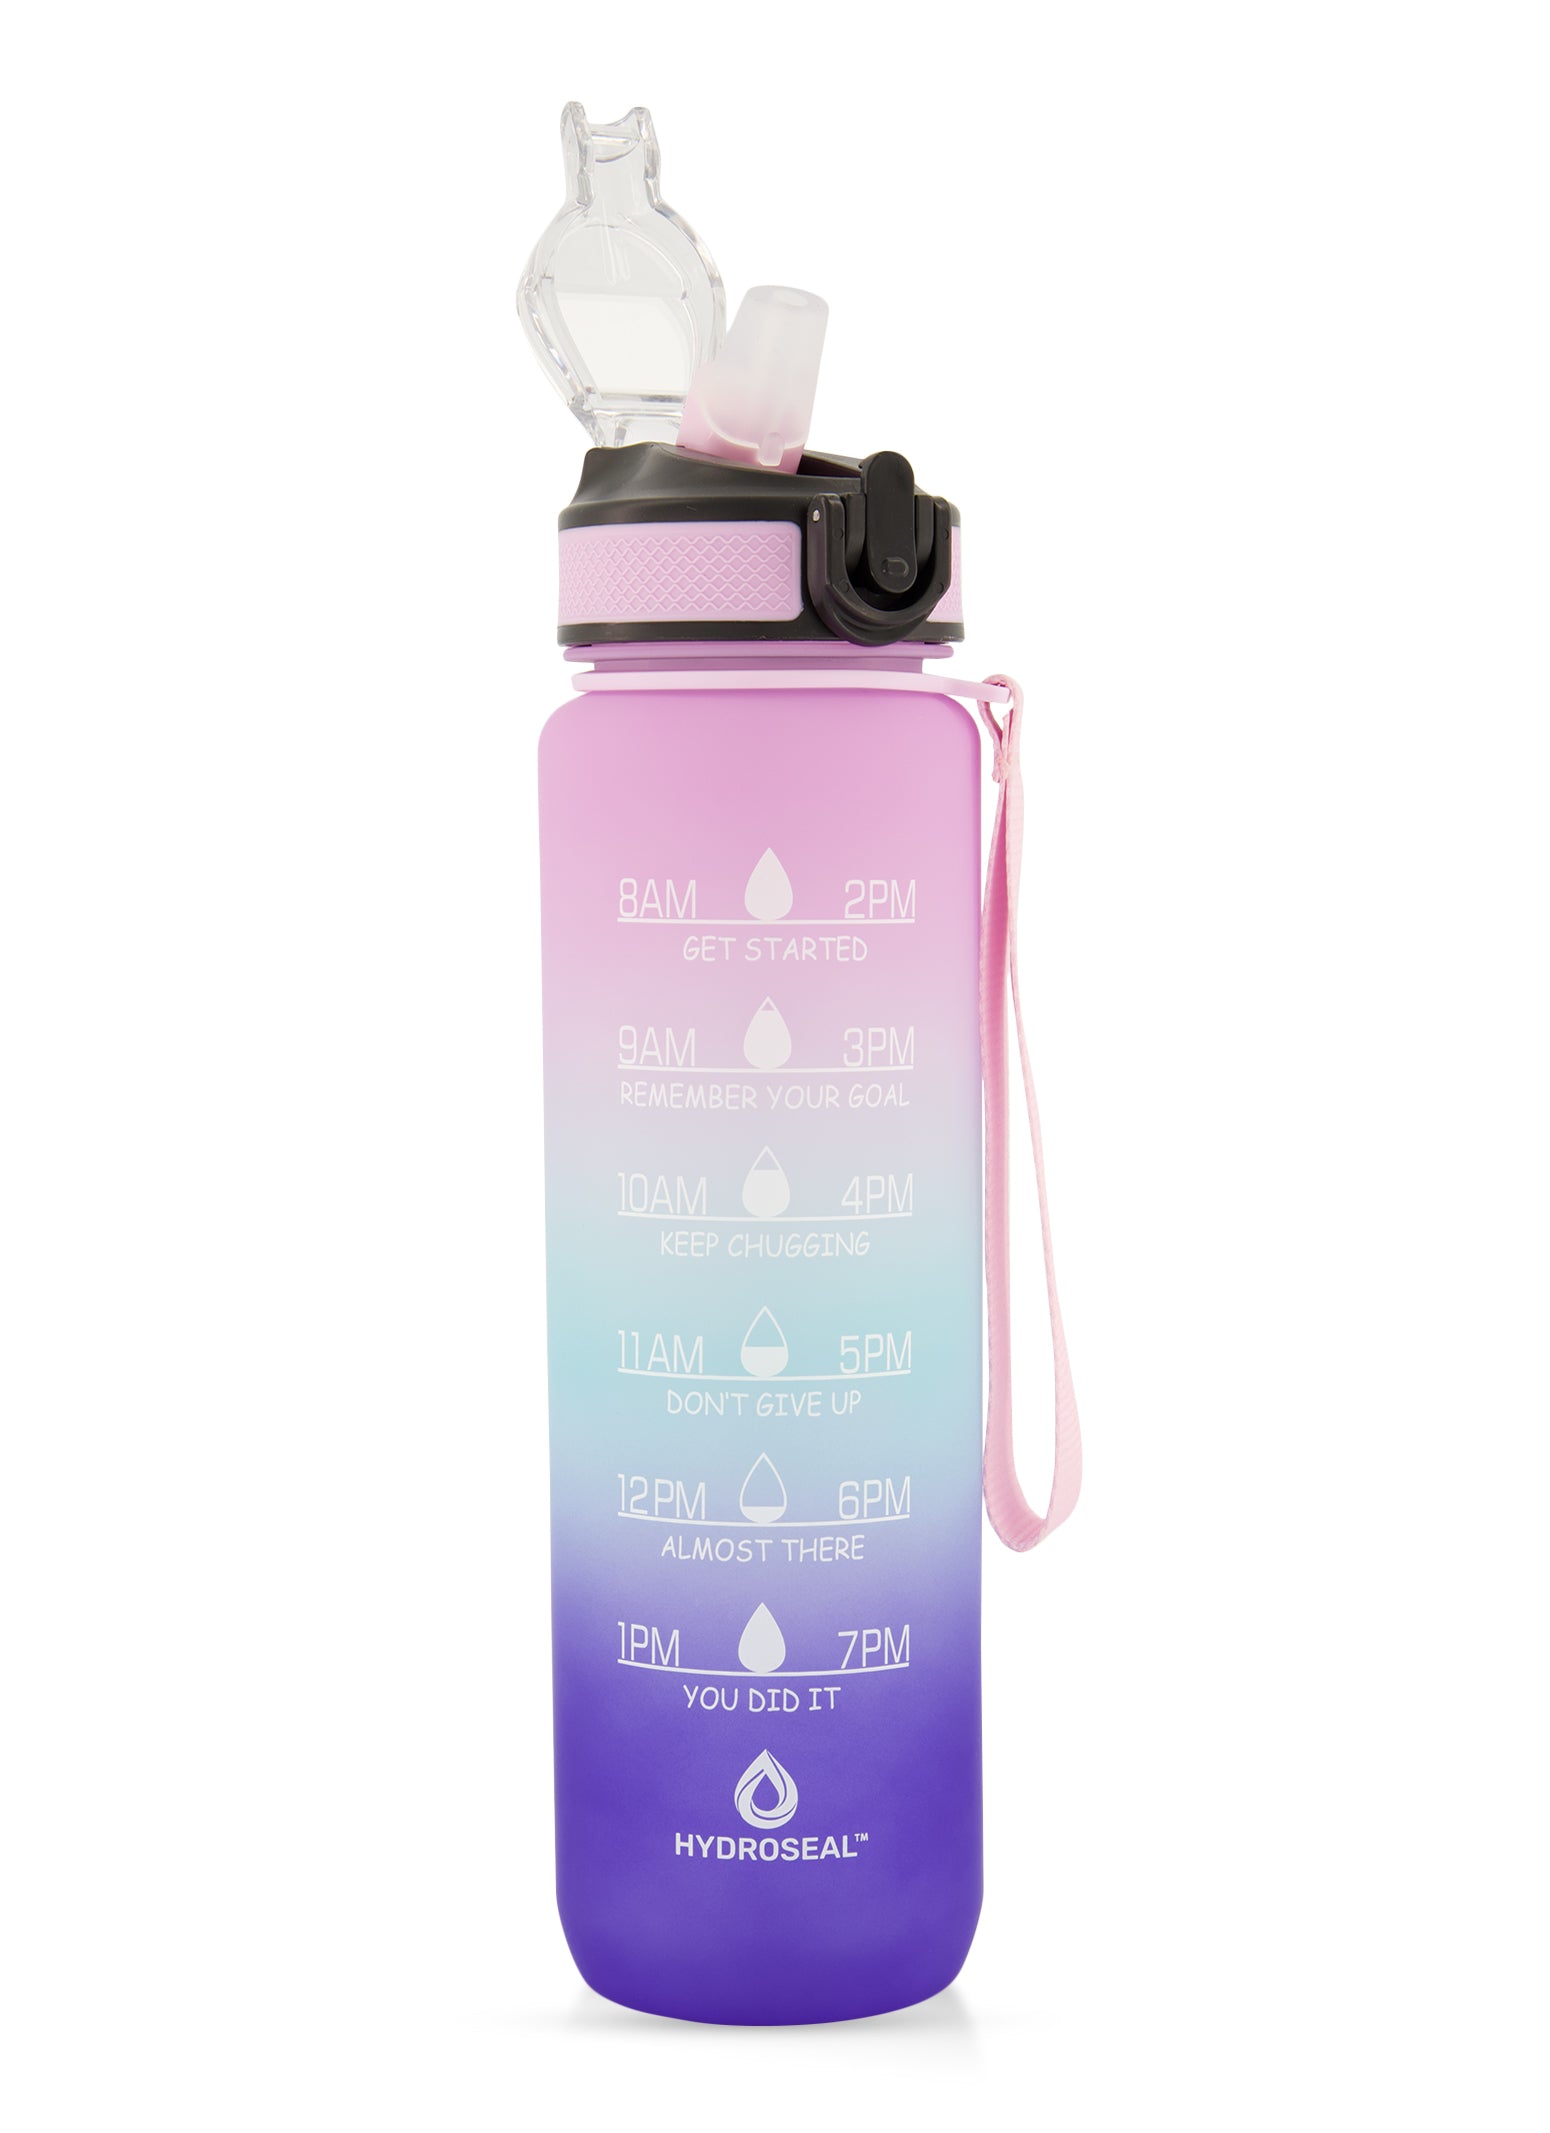 Flip your thirst, New Hydration Collection